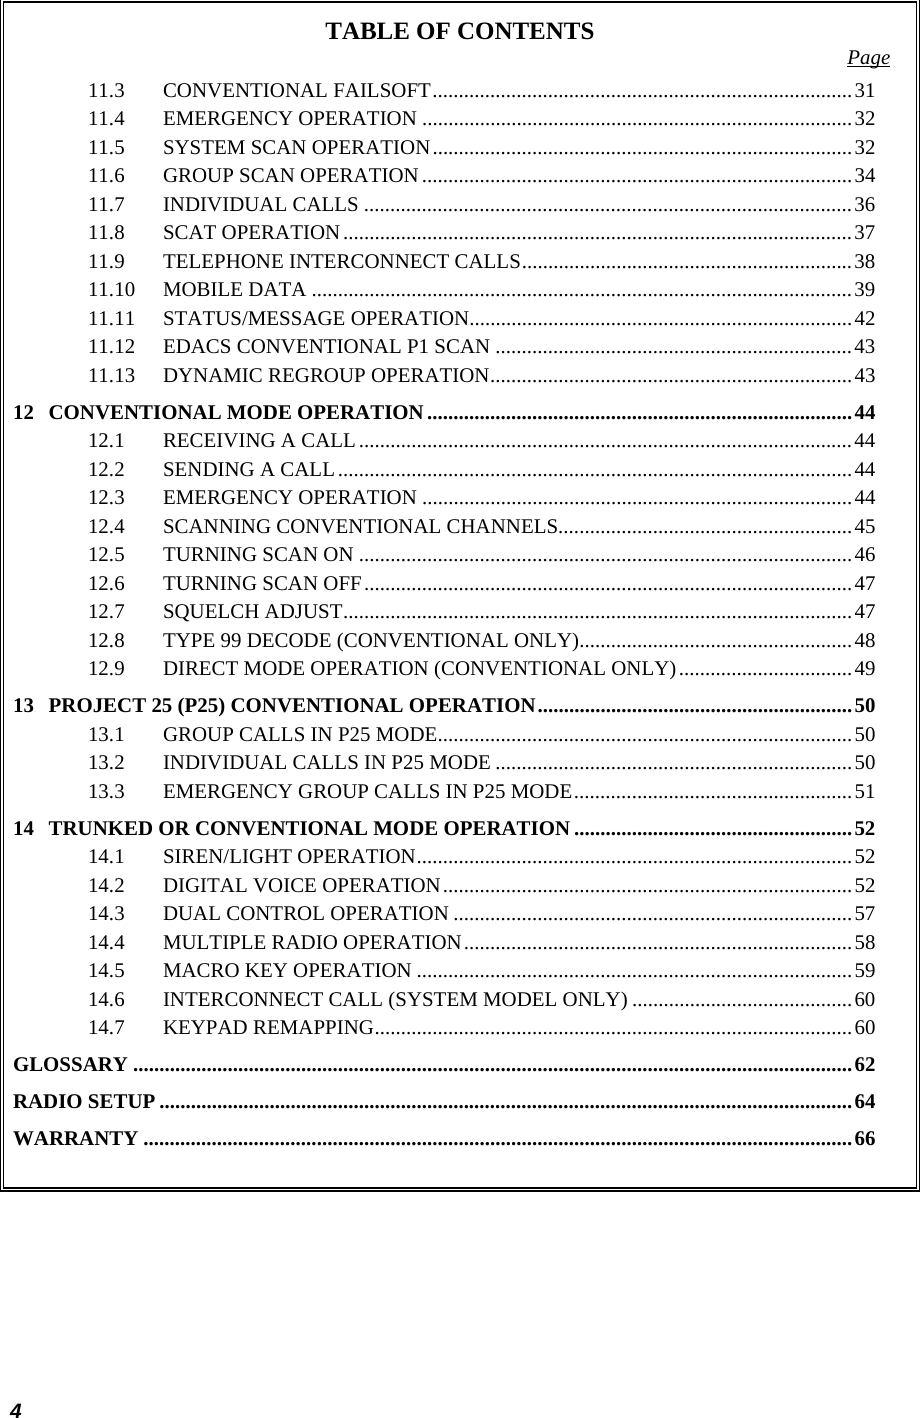  4 TABLE OF CONTENTS  Page 11.3 CONVENTIONAL FAILSOFT................................................................................31 11.4 EMERGENCY OPERATION ..................................................................................32 11.5 SYSTEM SCAN OPERATION................................................................................32 11.6 GROUP SCAN OPERATION ..................................................................................34 11.7 INDIVIDUAL CALLS .............................................................................................36 11.8 SCAT OPERATION.................................................................................................37 11.9 TELEPHONE INTERCONNECT CALLS...............................................................38 11.10 MOBILE DATA .......................................................................................................39 11.11 STATUS/MESSAGE OPERATION.........................................................................42 11.12 EDACS CONVENTIONAL P1 SCAN ....................................................................43 11.13 DYNAMIC REGROUP OPERATION.....................................................................43 12 CONVENTIONAL MODE OPERATION.................................................................................44 12.1 RECEIVING A CALL..............................................................................................44 12.2 SENDING A CALL..................................................................................................44 12.3 EMERGENCY OPERATION ..................................................................................44 12.4 SCANNING CONVENTIONAL CHANNELS........................................................45 12.5 TURNING SCAN ON ..............................................................................................46 12.6 TURNING SCAN OFF.............................................................................................47 12.7 SQUELCH ADJUST.................................................................................................47 12.8 TYPE 99 DECODE (CONVENTIONAL ONLY)....................................................48 12.9 DIRECT MODE OPERATION (CONVENTIONAL ONLY).................................49 13 PROJECT 25 (P25) CONVENTIONAL OPERATION............................................................50 13.1 GROUP CALLS IN P25 MODE...............................................................................50 13.2 INDIVIDUAL CALLS IN P25 MODE ....................................................................50 13.3 EMERGENCY GROUP CALLS IN P25 MODE.....................................................51 14 TRUNKED OR CONVENTIONAL MODE OPERATION .....................................................52 14.1 SIREN/LIGHT OPERATION...................................................................................52 14.2 DIGITAL VOICE OPERATION..............................................................................52 14.3 DUAL CONTROL OPERATION ............................................................................57 14.4 MULTIPLE RADIO OPERATION..........................................................................58 14.5 MACRO KEY OPERATION ...................................................................................59 14.6 INTERCONNECT CALL (SYSTEM MODEL ONLY) ..........................................60 14.7 KEYPAD REMAPPING...........................................................................................60 GLOSSARY .........................................................................................................................................62 RADIO SETUP ....................................................................................................................................64 WARRANTY .......................................................................................................................................66  